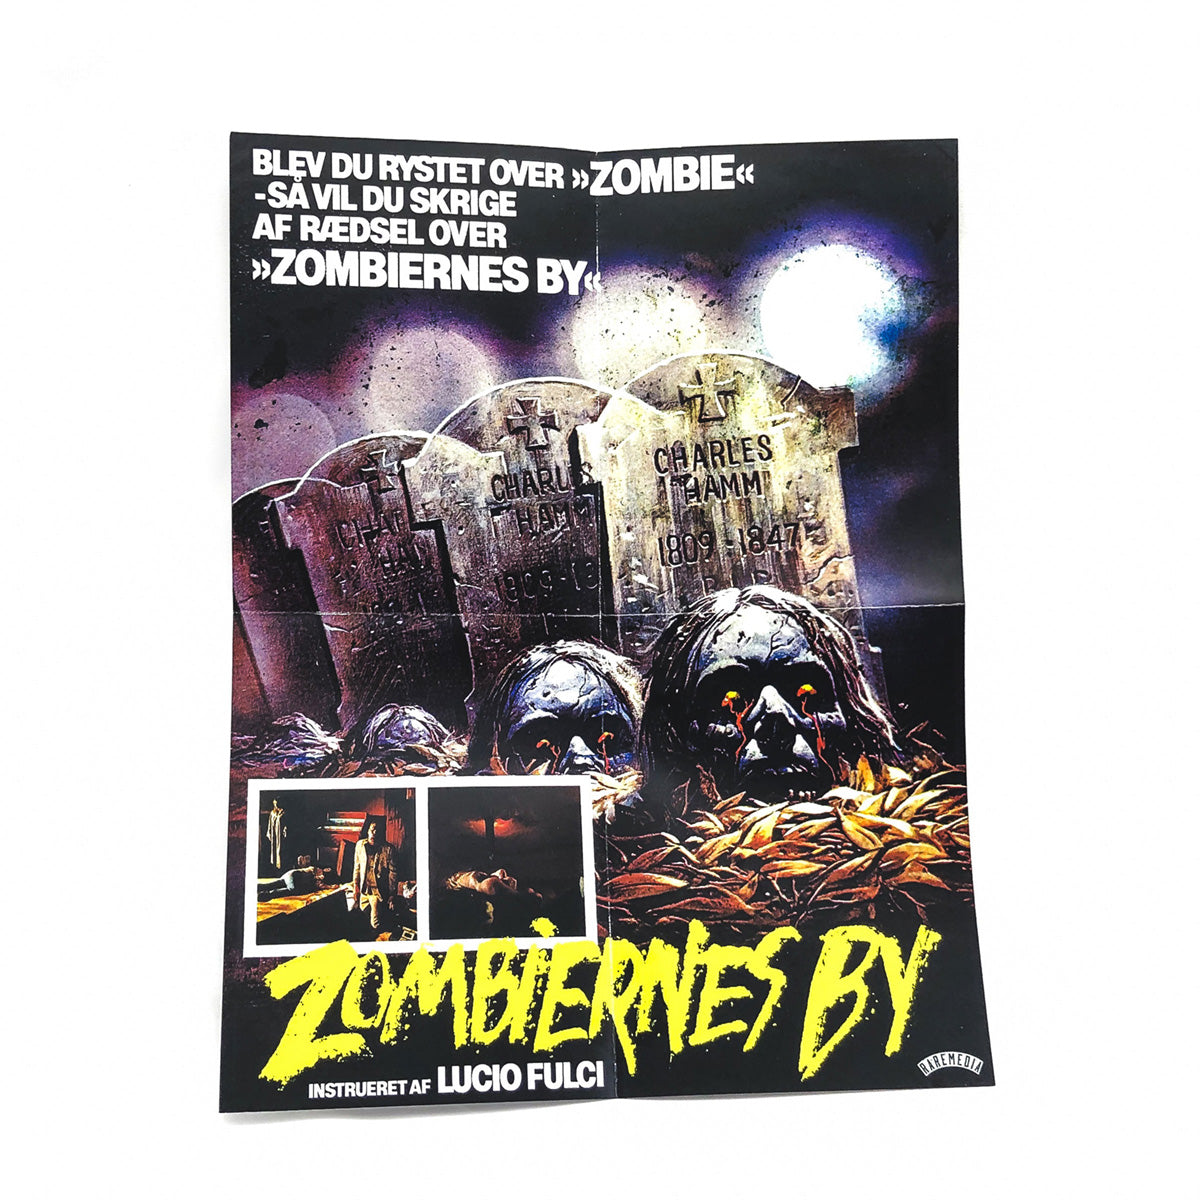 City of the Living Dead - Grave Monotone Slime Variant